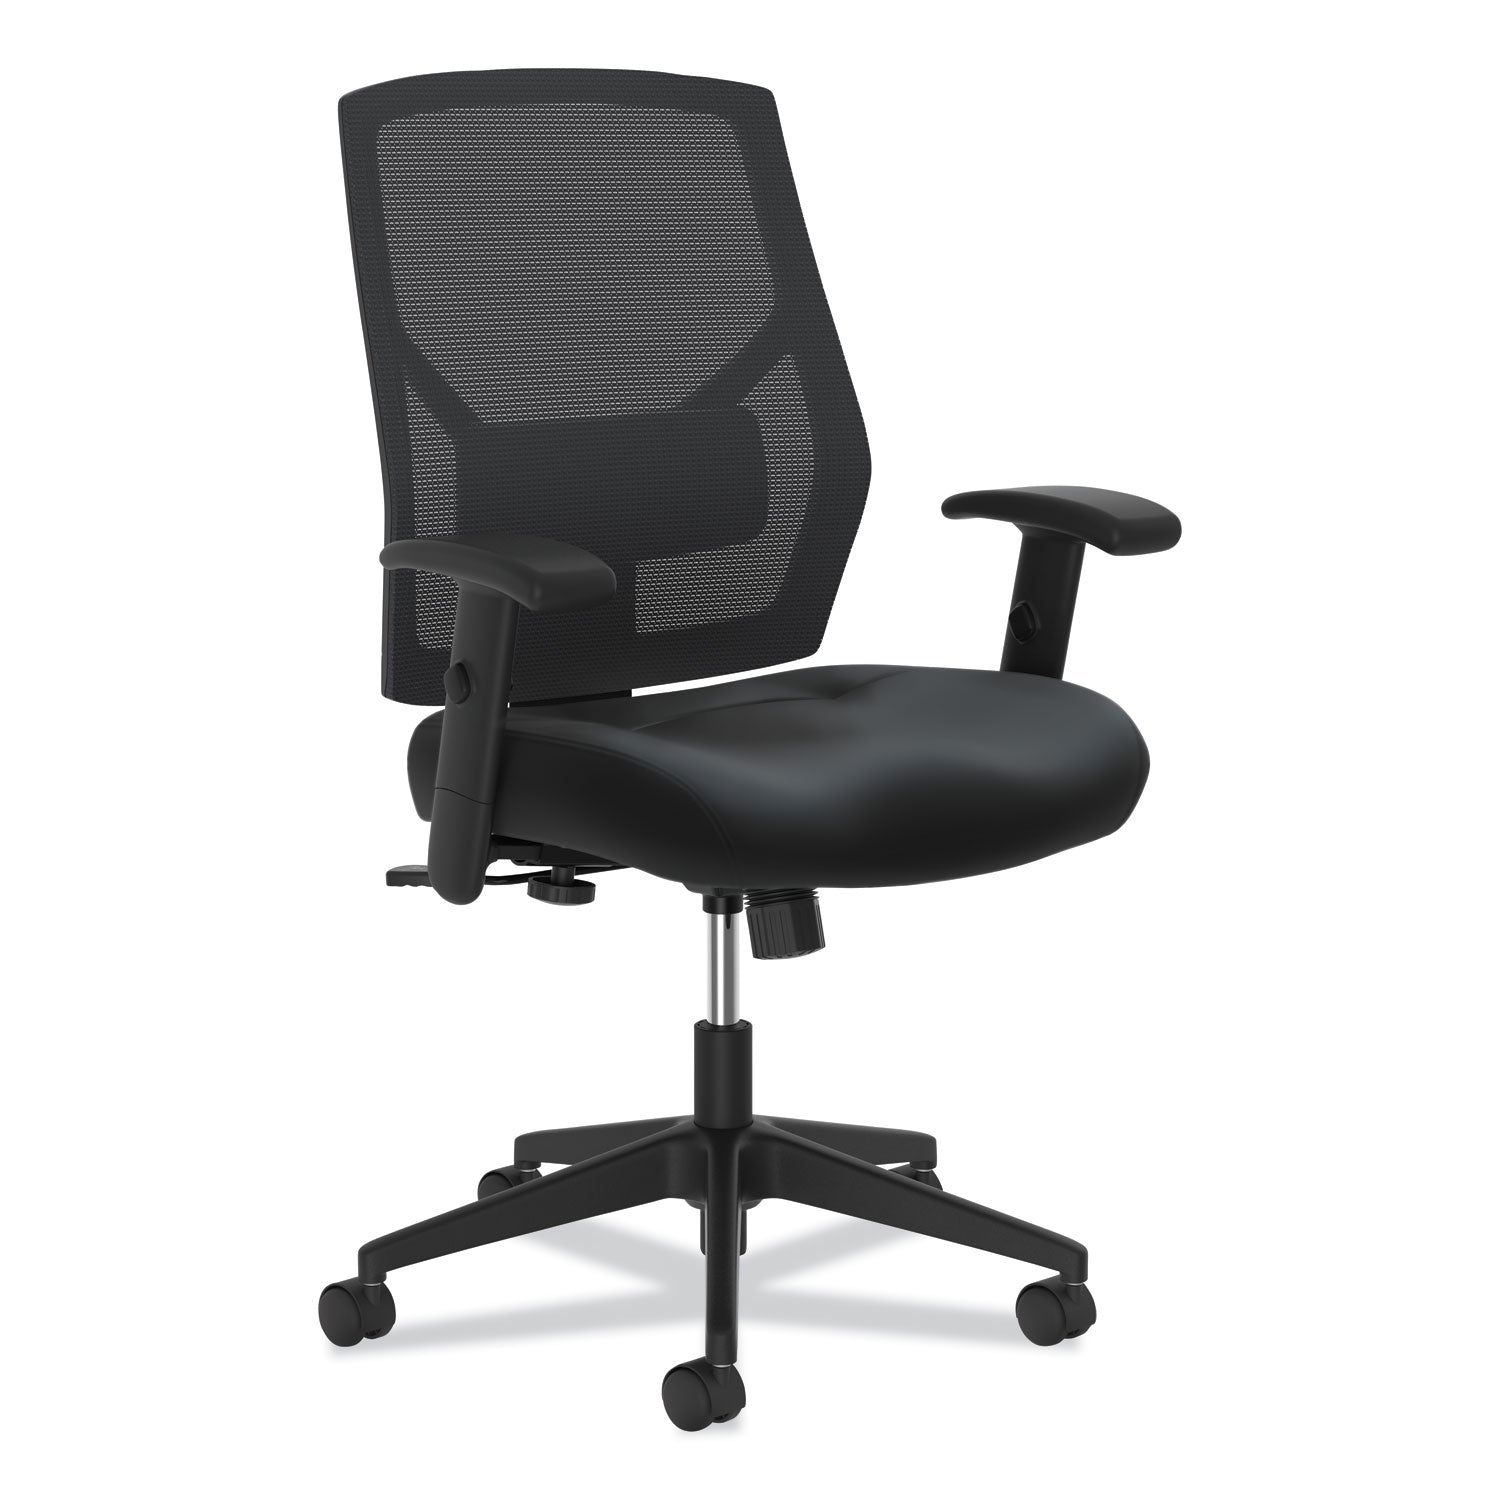 crio-high-back-task-chair-supports-up-to-250-lb-18-to-22-seat-height-black_bsxvl581sb11t - 1